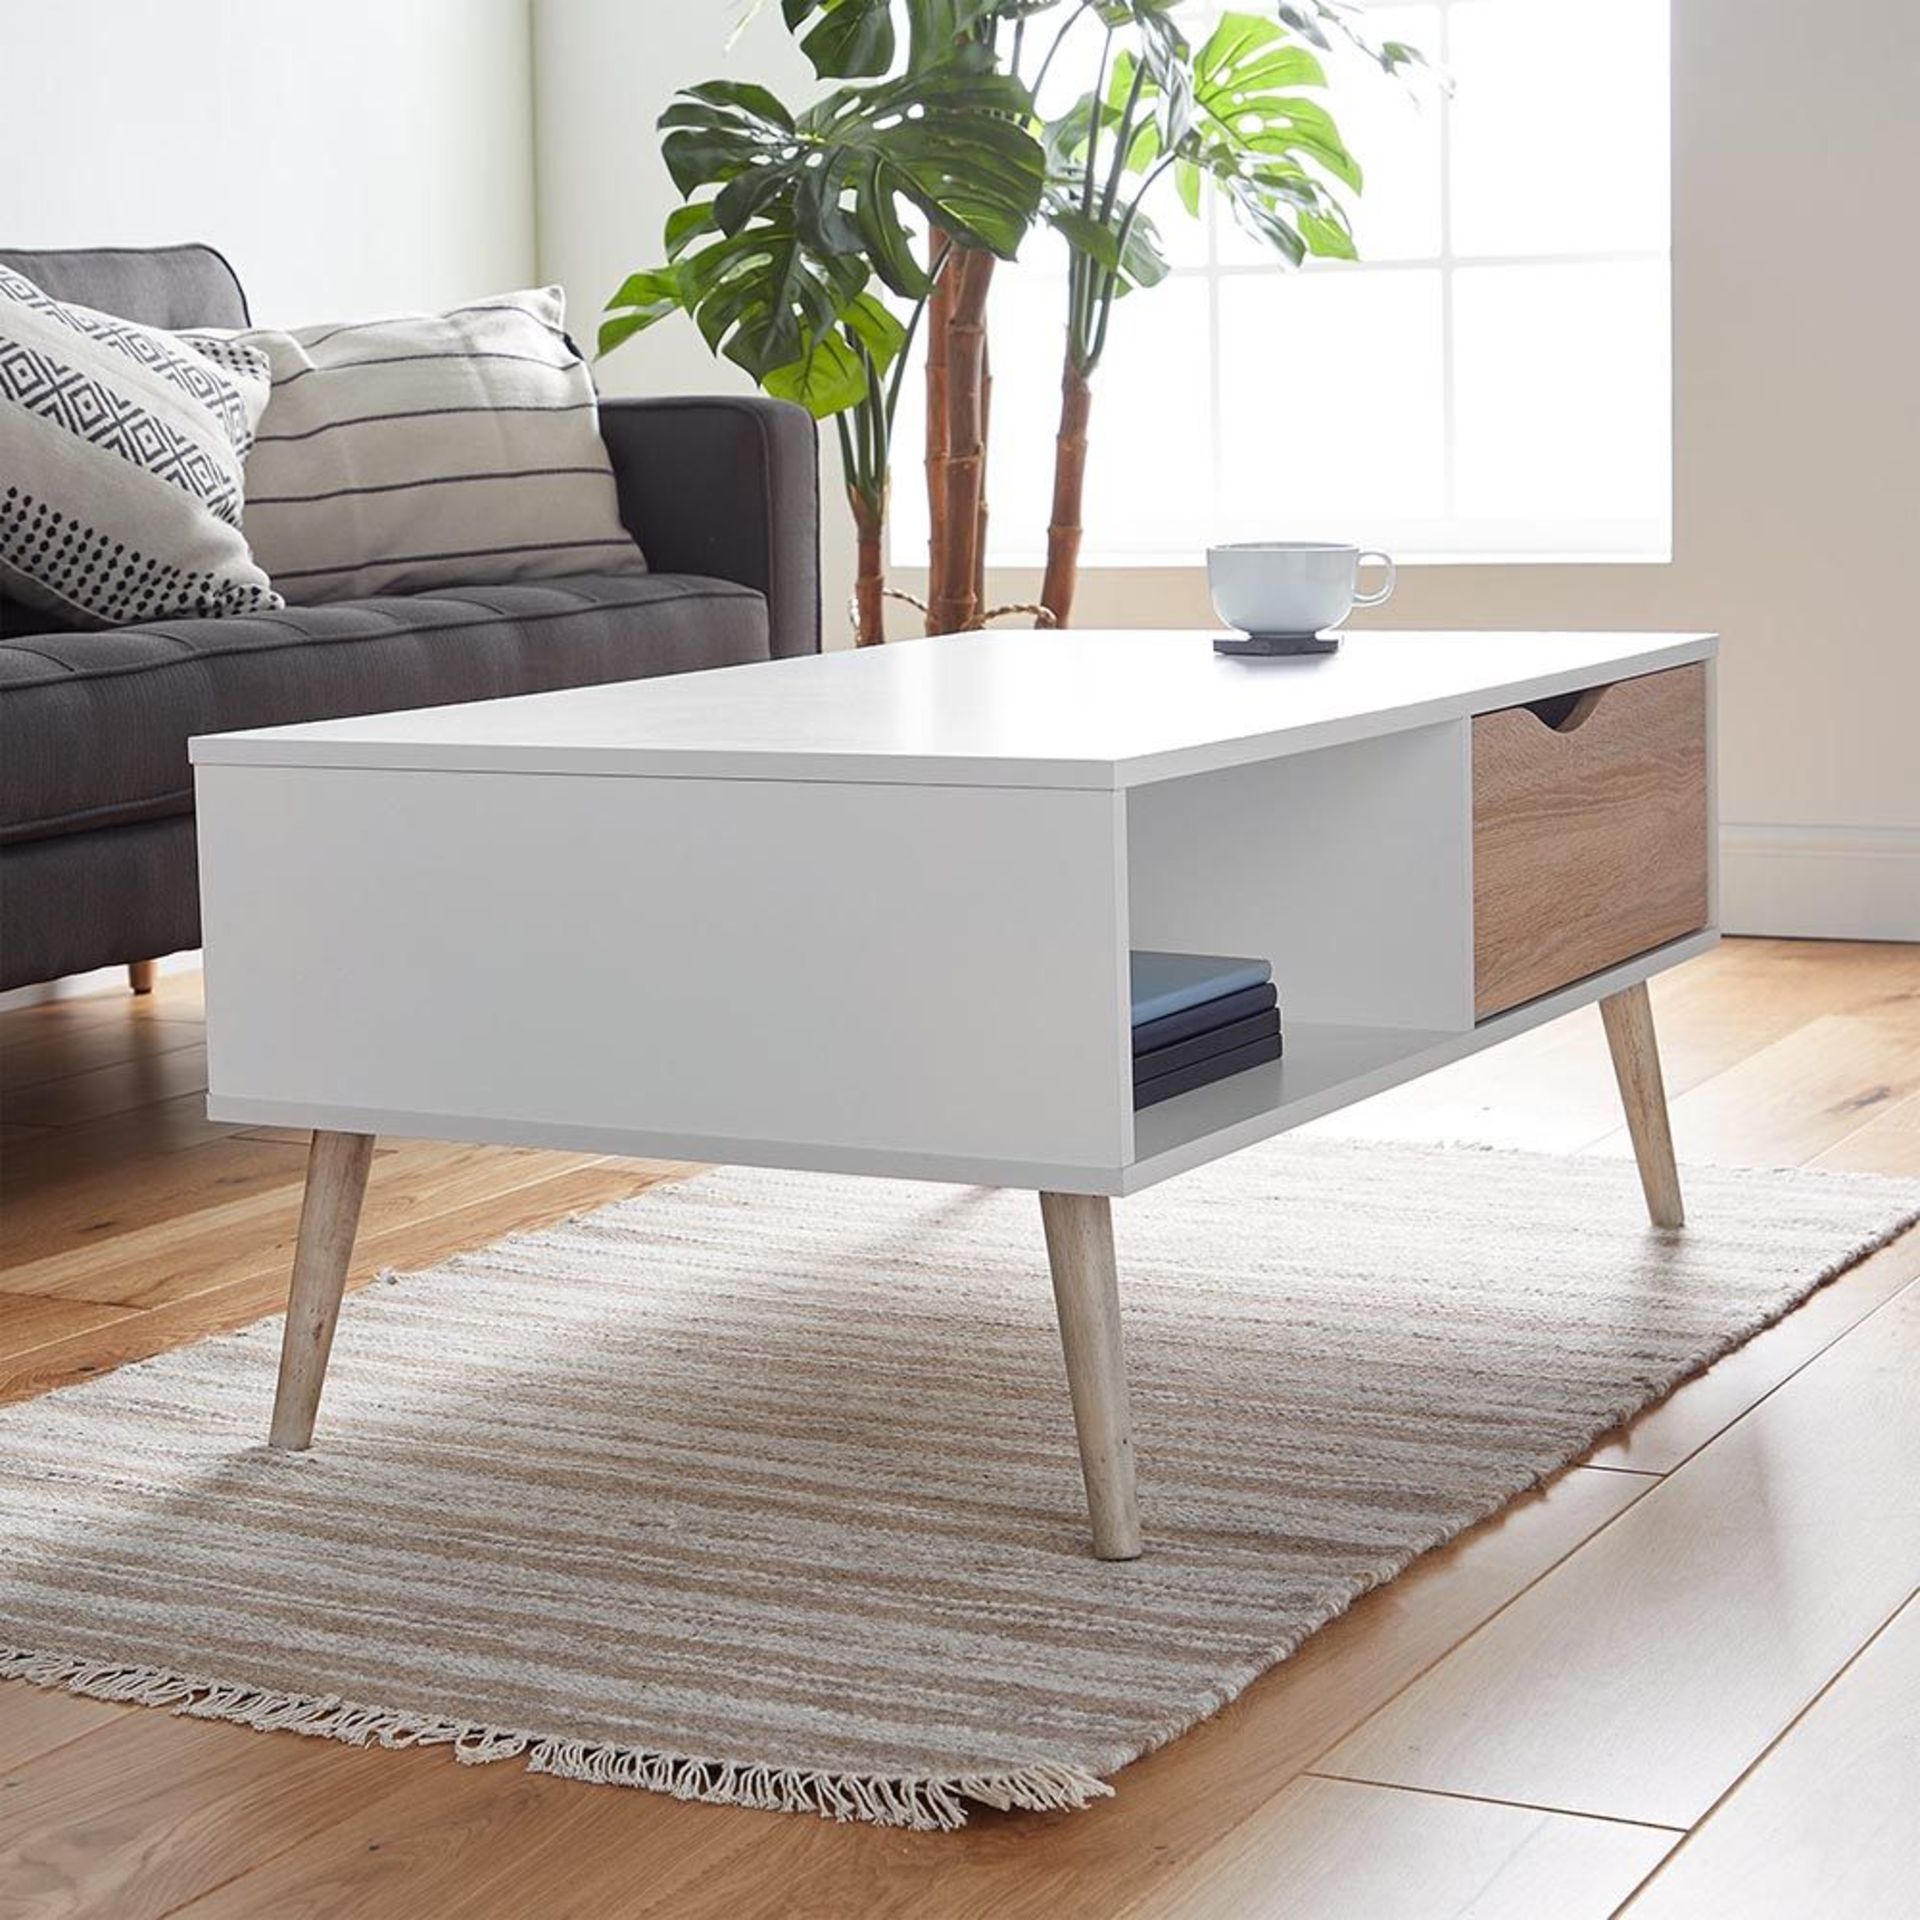 (V11) White & Oak Coffee Table Split front features an open shelf on one side and a drawer on ... - Image 3 of 4